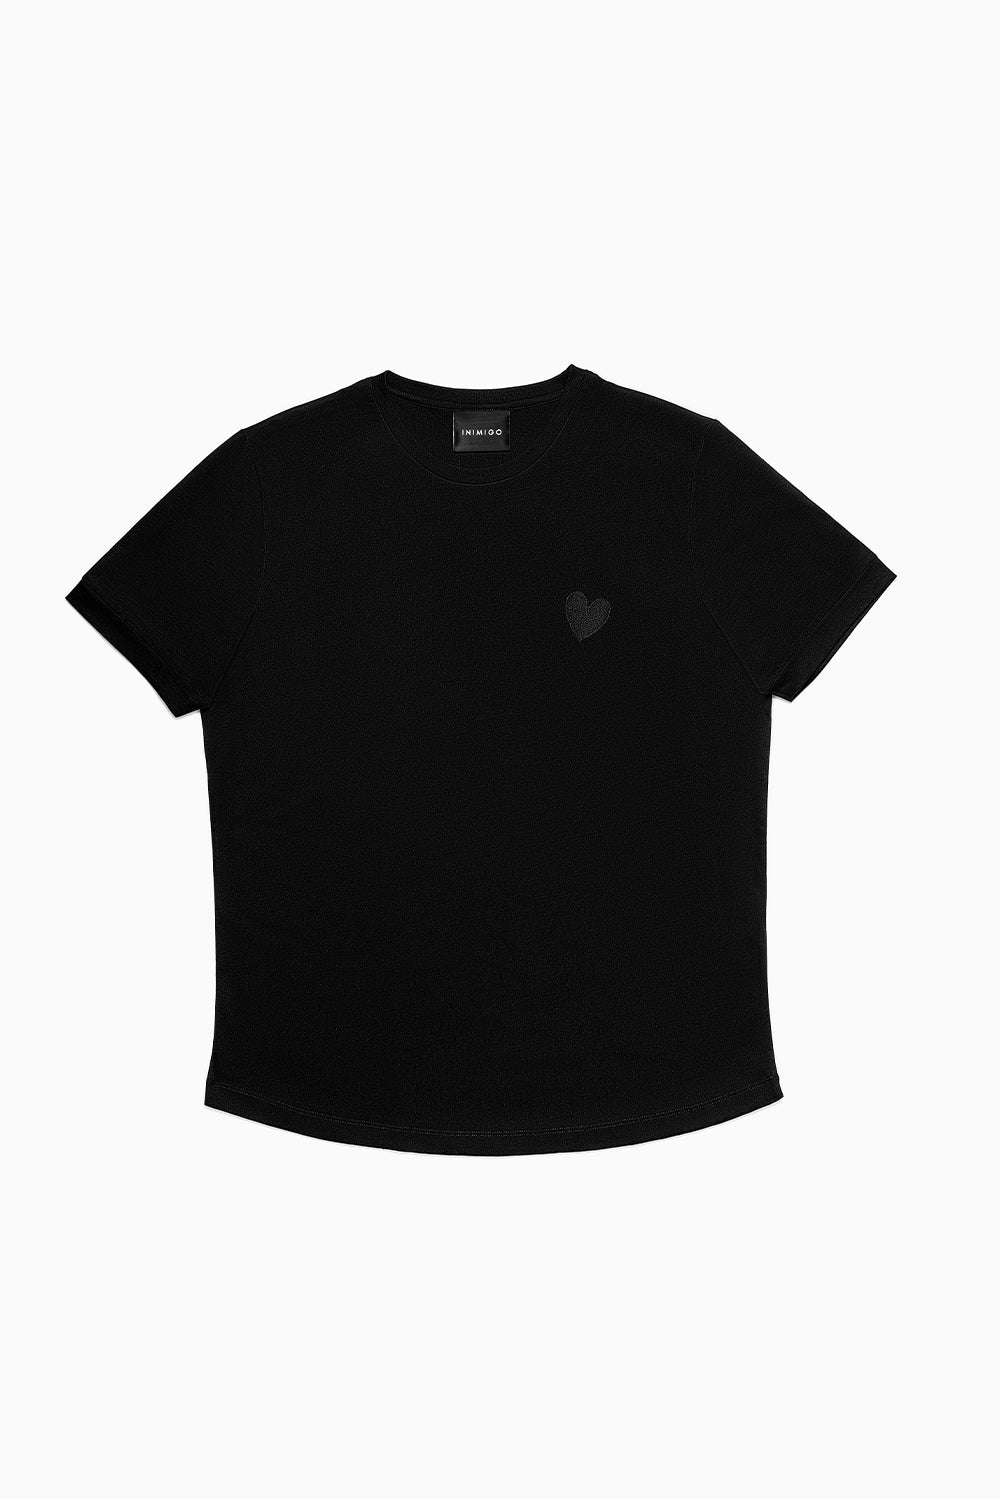 Classic Embroidery Heart Black T-shirt